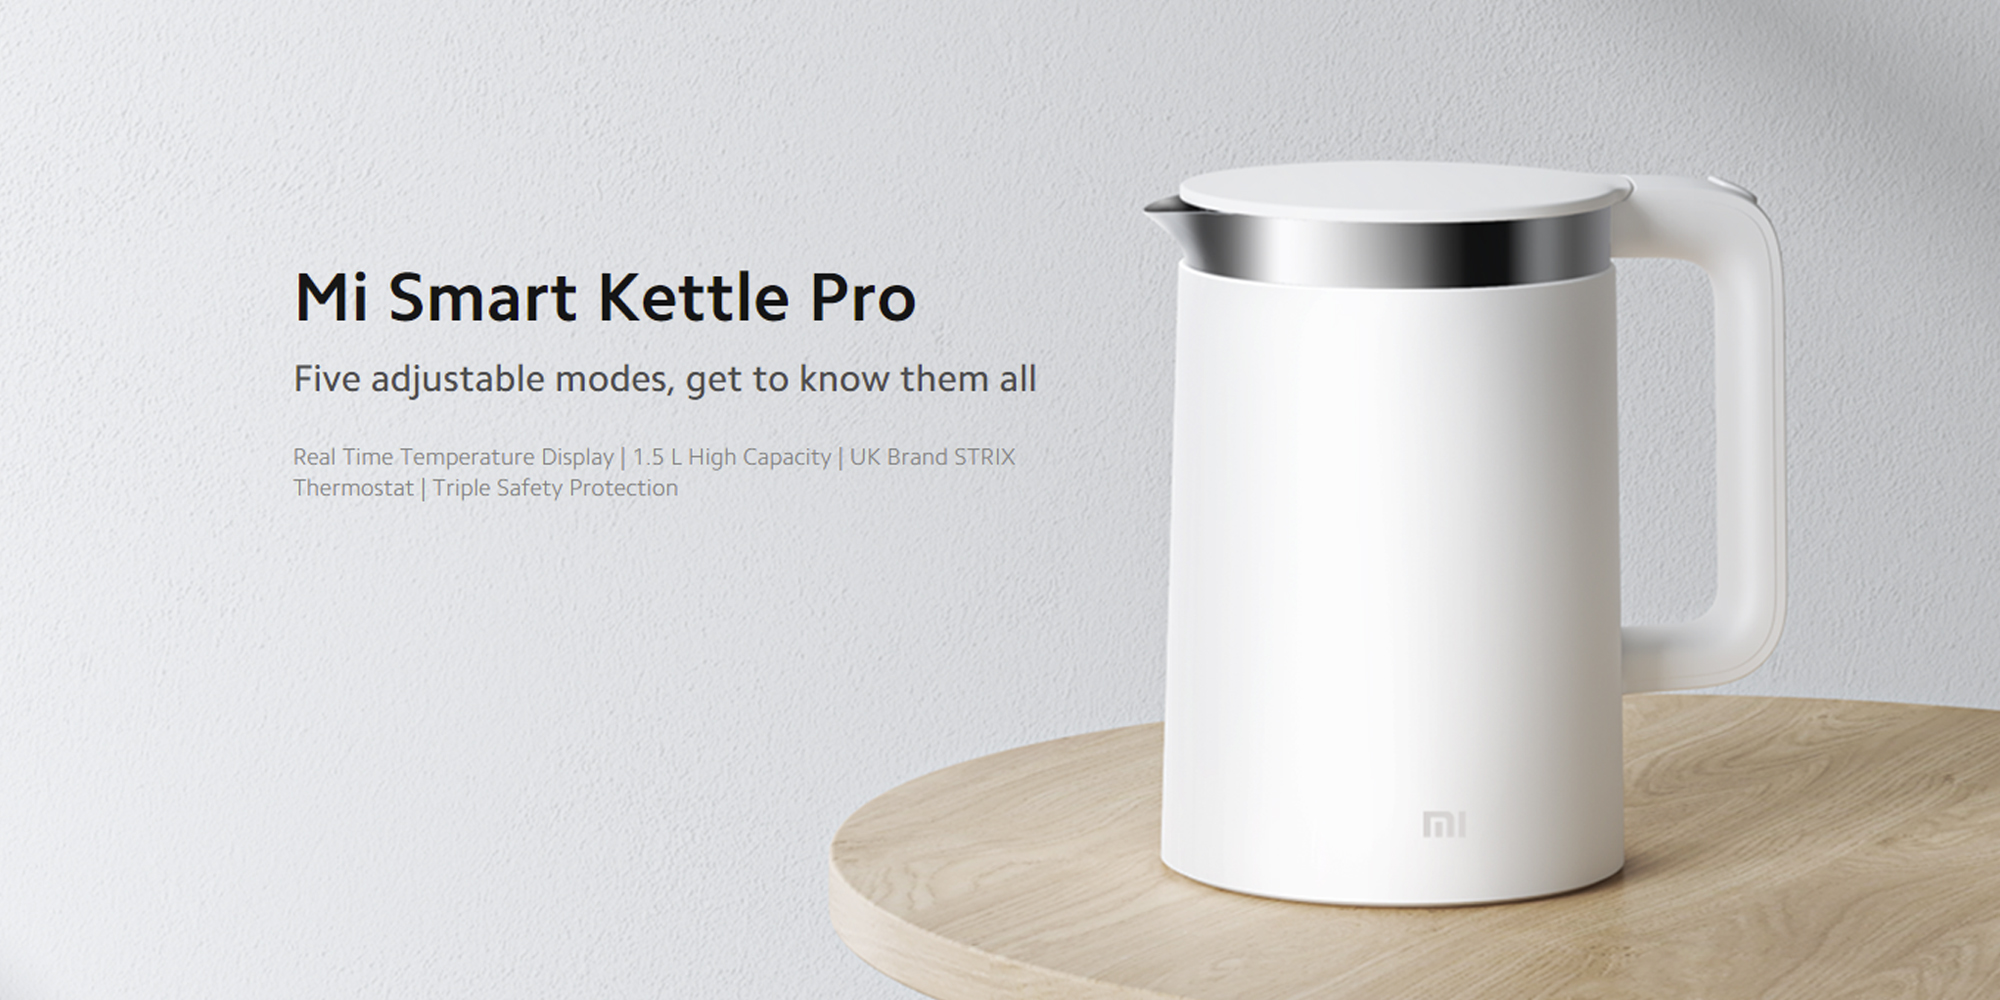 Xiaomi Mi Smart Electric Kettle Pro Water Boiler With Mobile App Control, 1.5L Water Capacity, Bluetooth 4.0, Stainless Steel